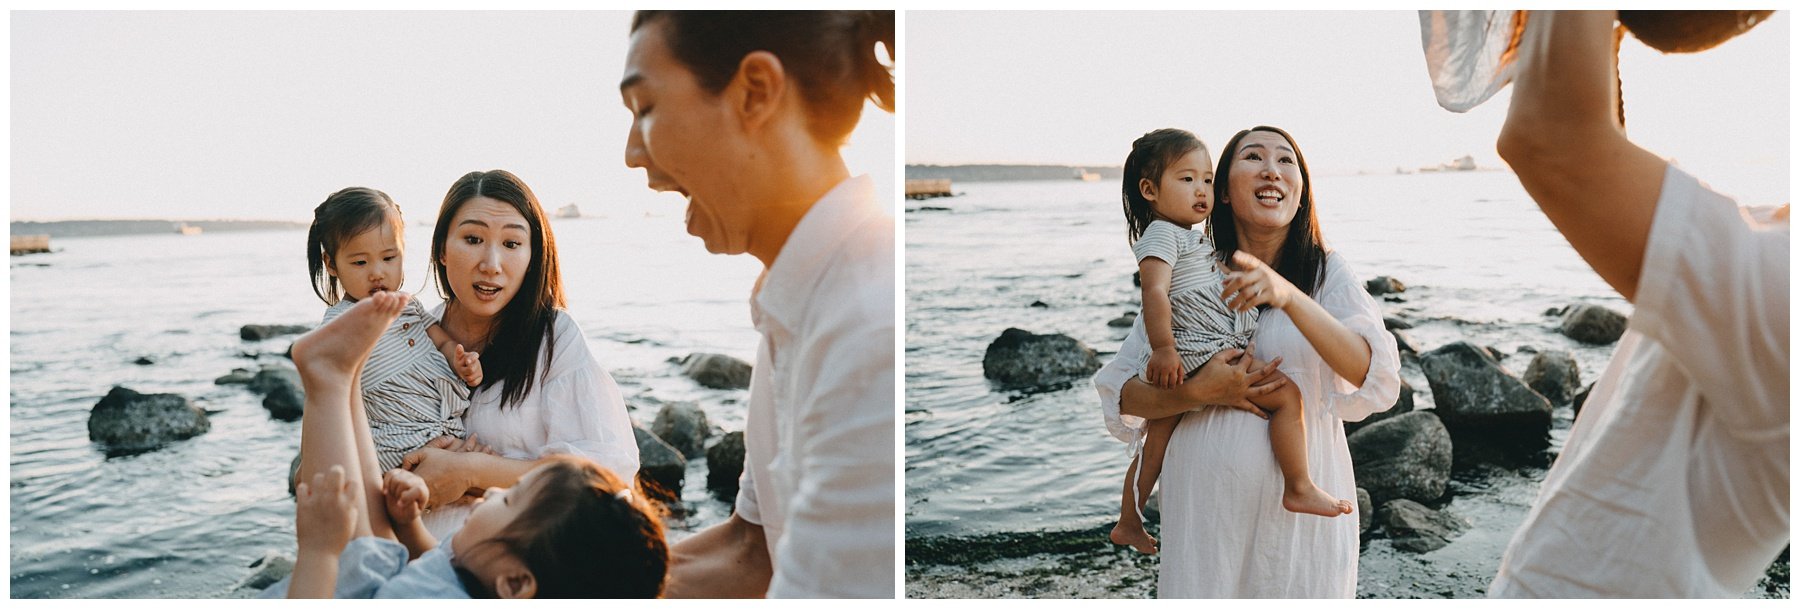 Vancouver Family Photographer || Stanley Park Family photographer || Jayme Lang Photographer_4257.jpg